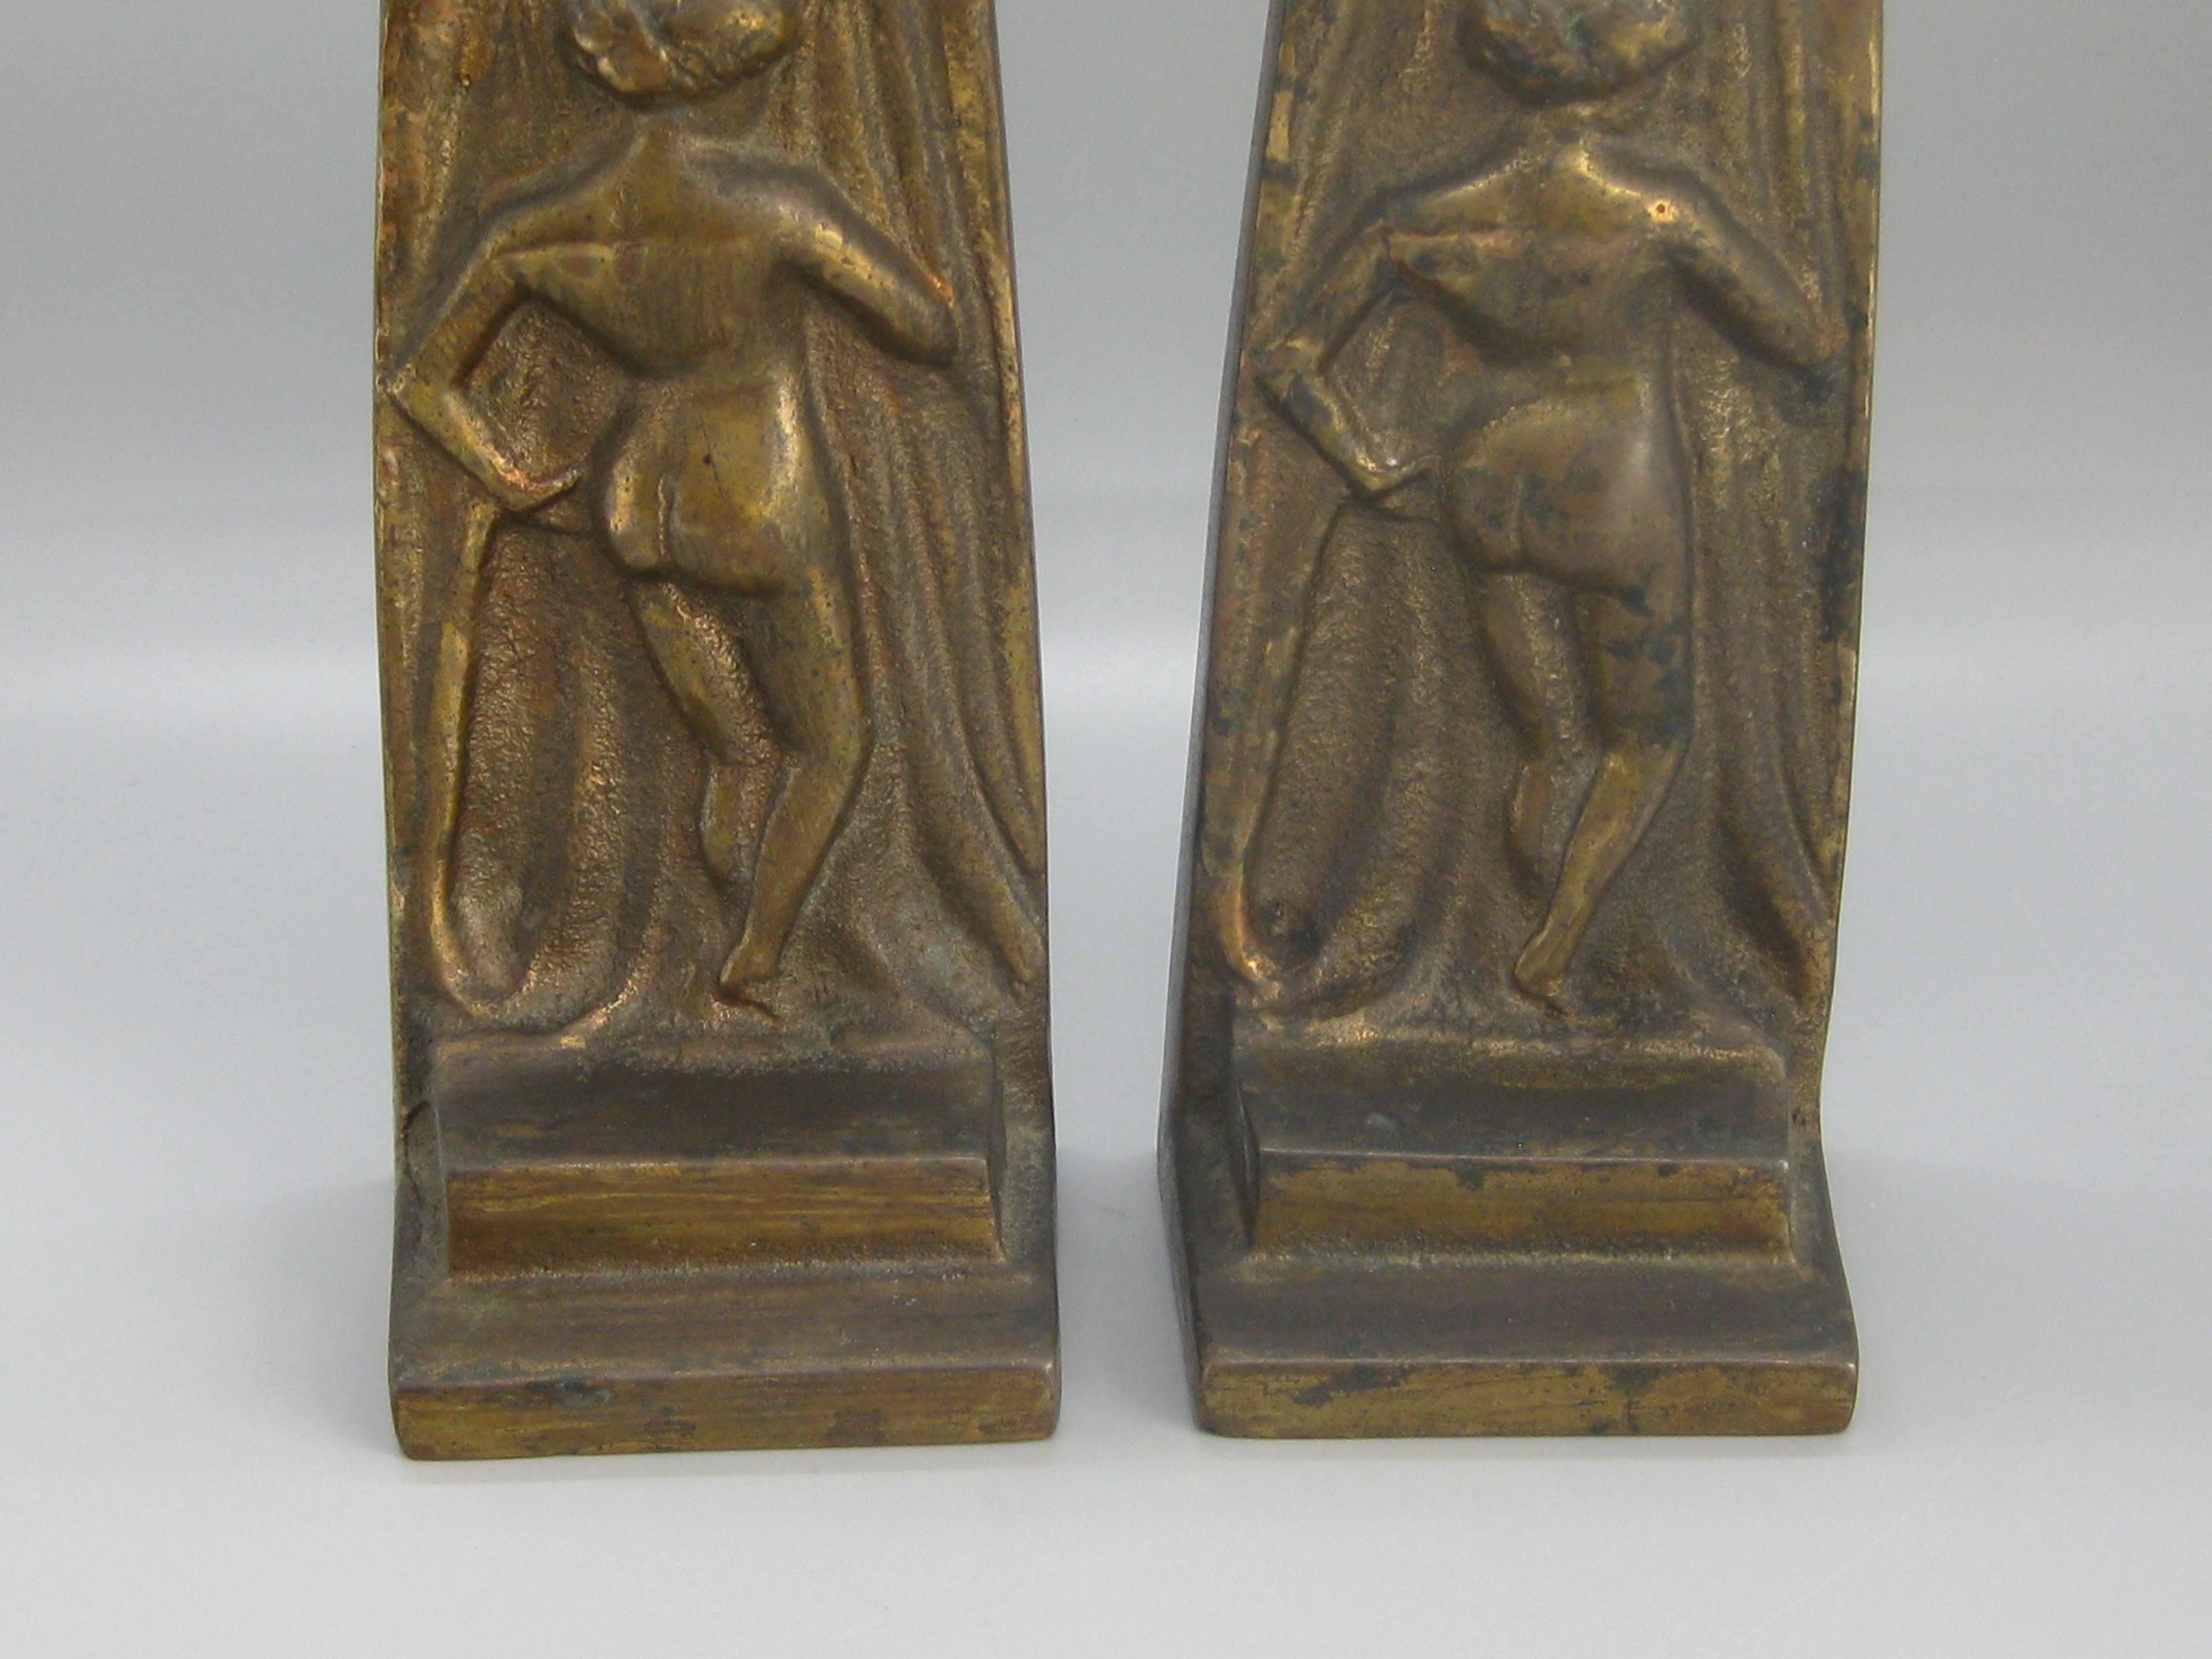 Antique Art Deco Nude Lady Woman Figural Cast Brass Bookends Hubley Era In Good Condition For Sale In San Diego, CA